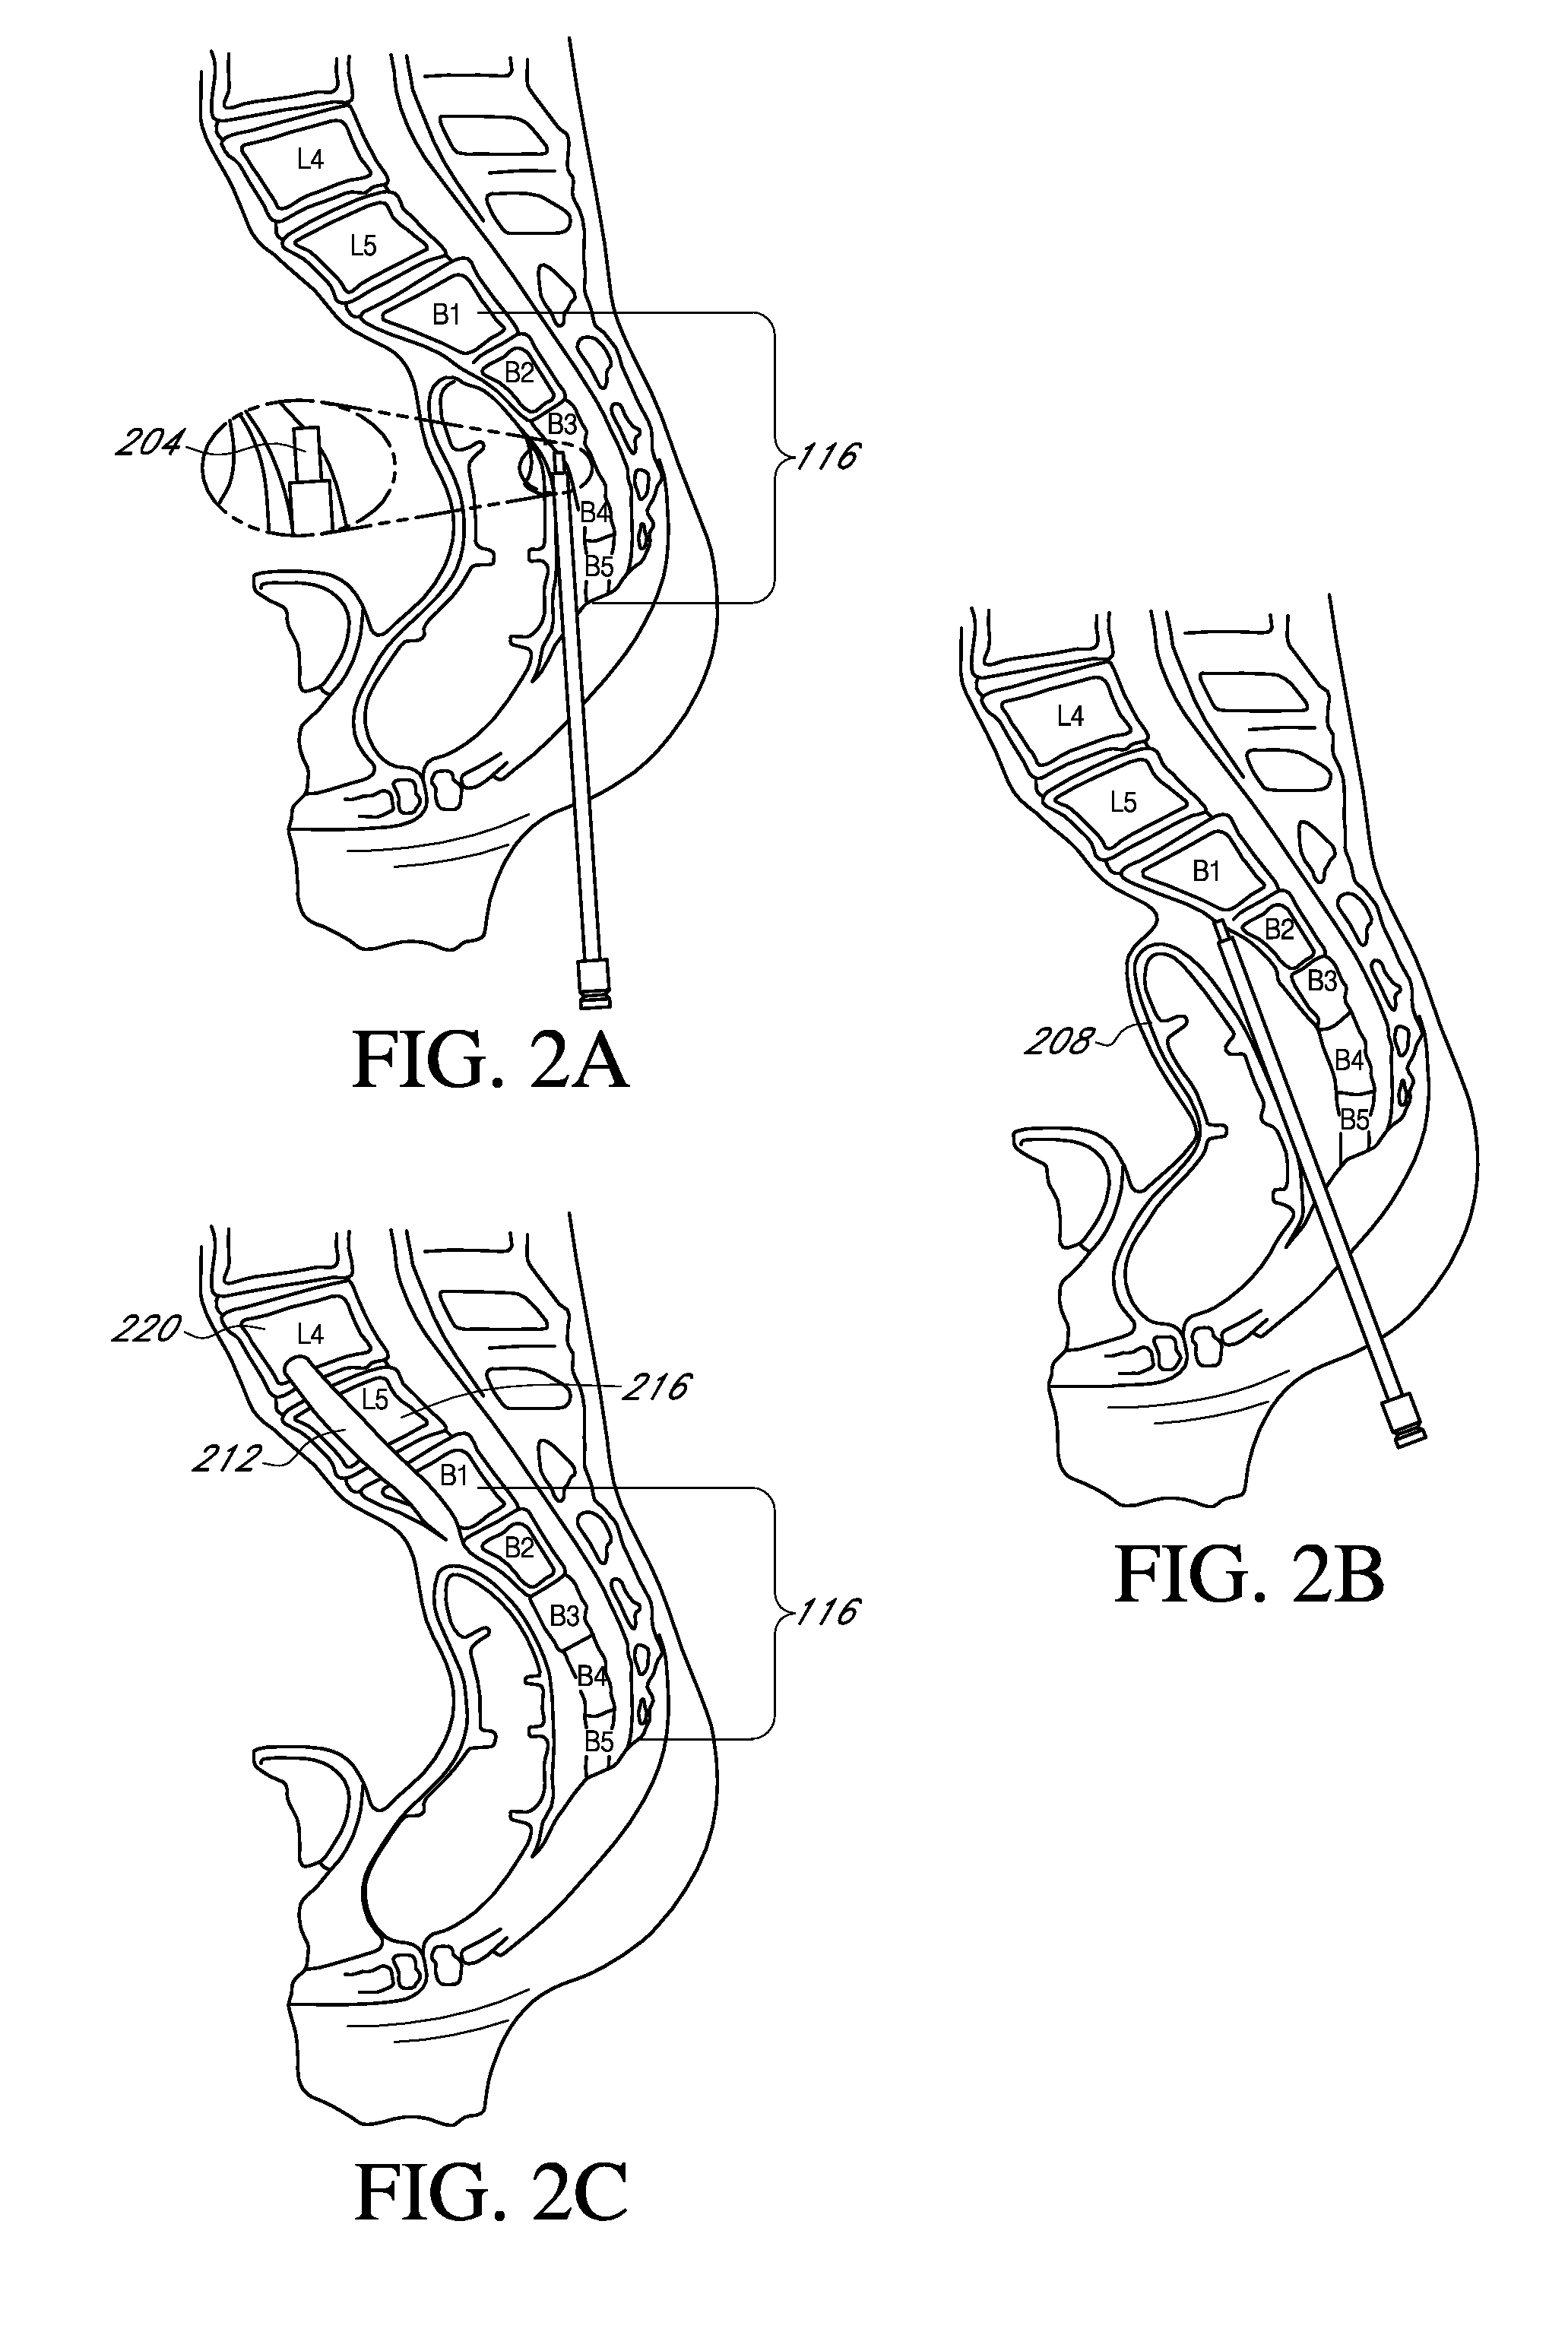 Spinal implants and implantation system